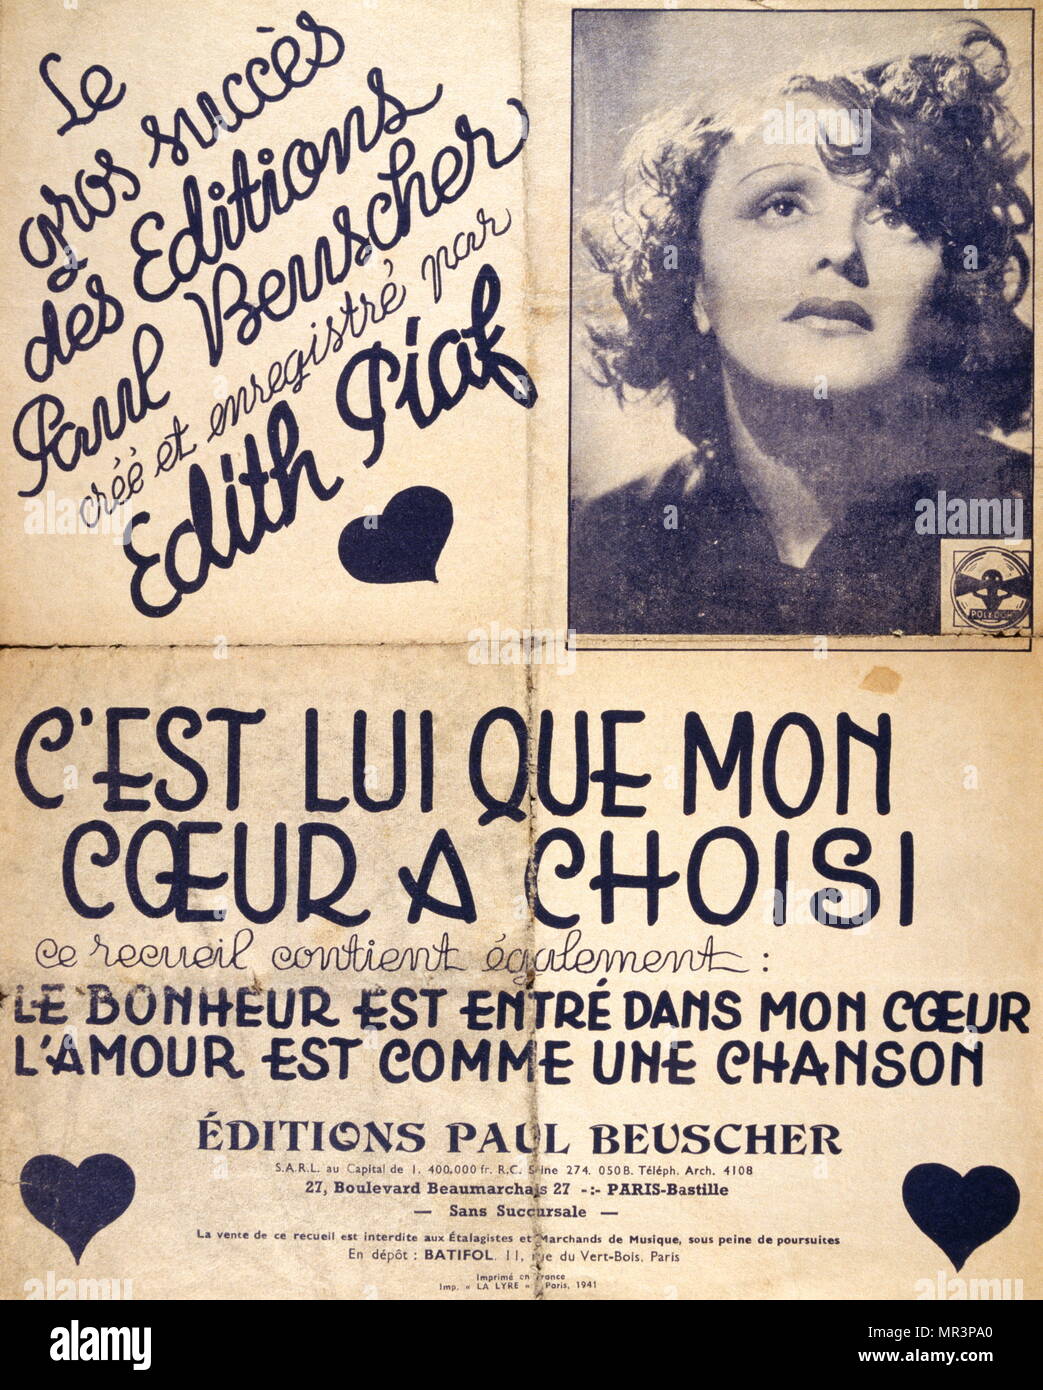 Music Book For Mon Coeur A Choisis Sung By French Singer Edith Piaf 1947 Stock Photo Alamy